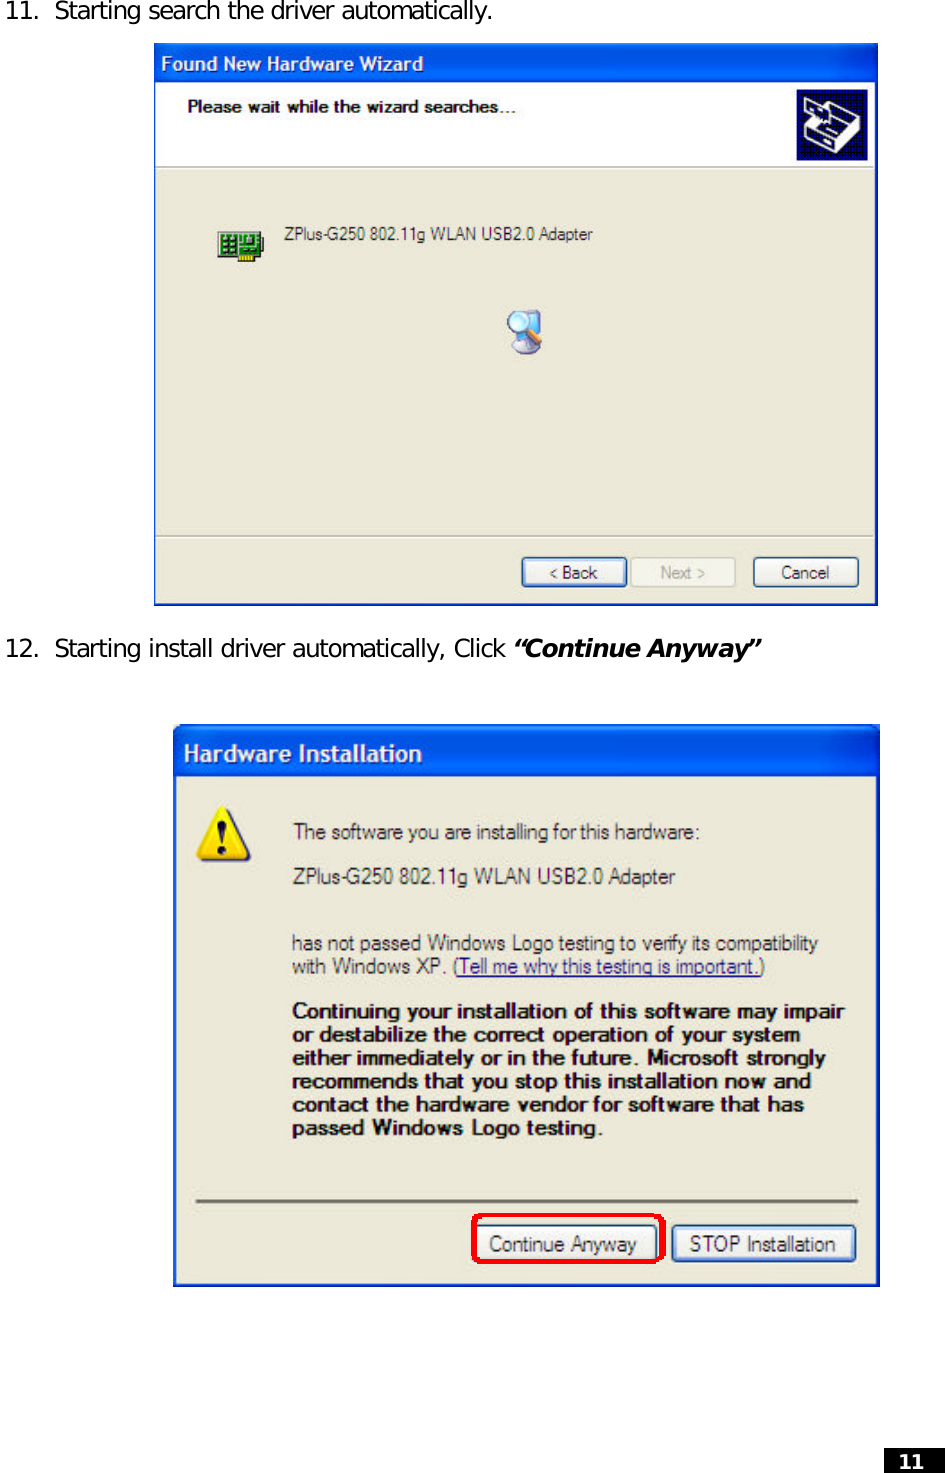  11   11. Starting search the driver automatically.                    12. Starting install driver automatically, Click “Continue Anyway”    